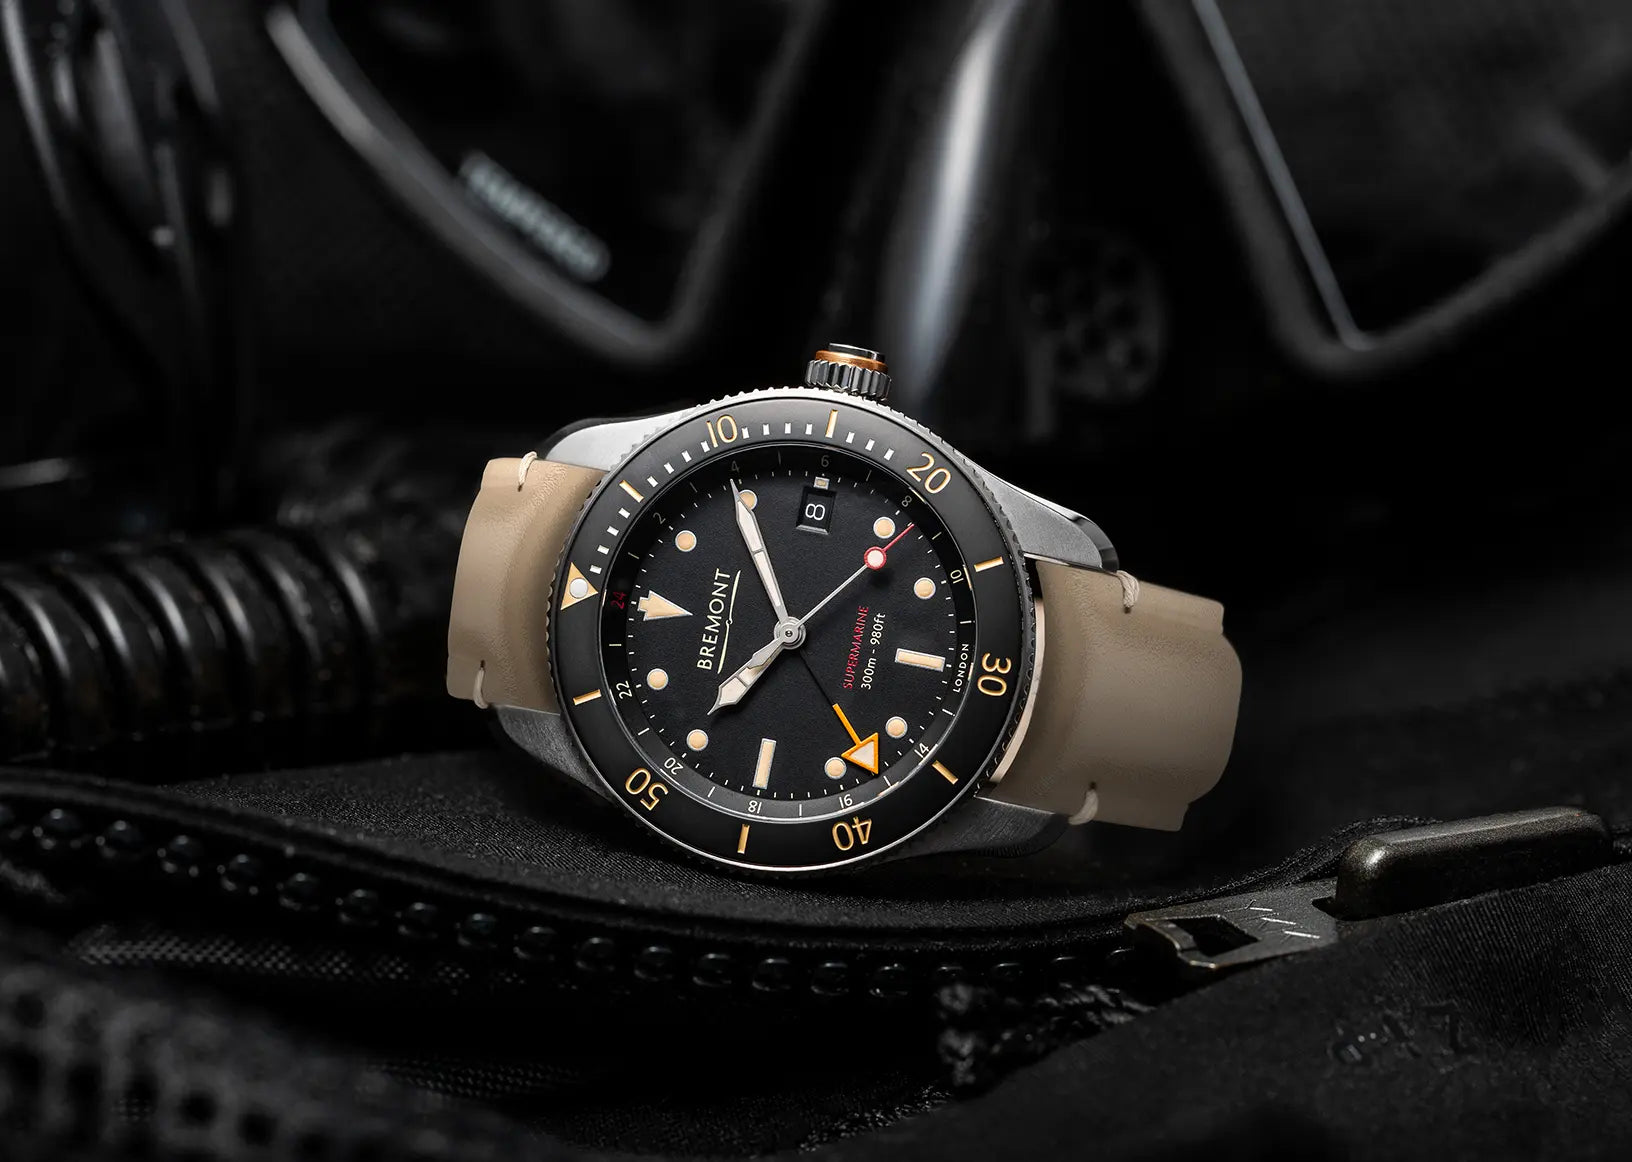 What to look for in your next diving watch?